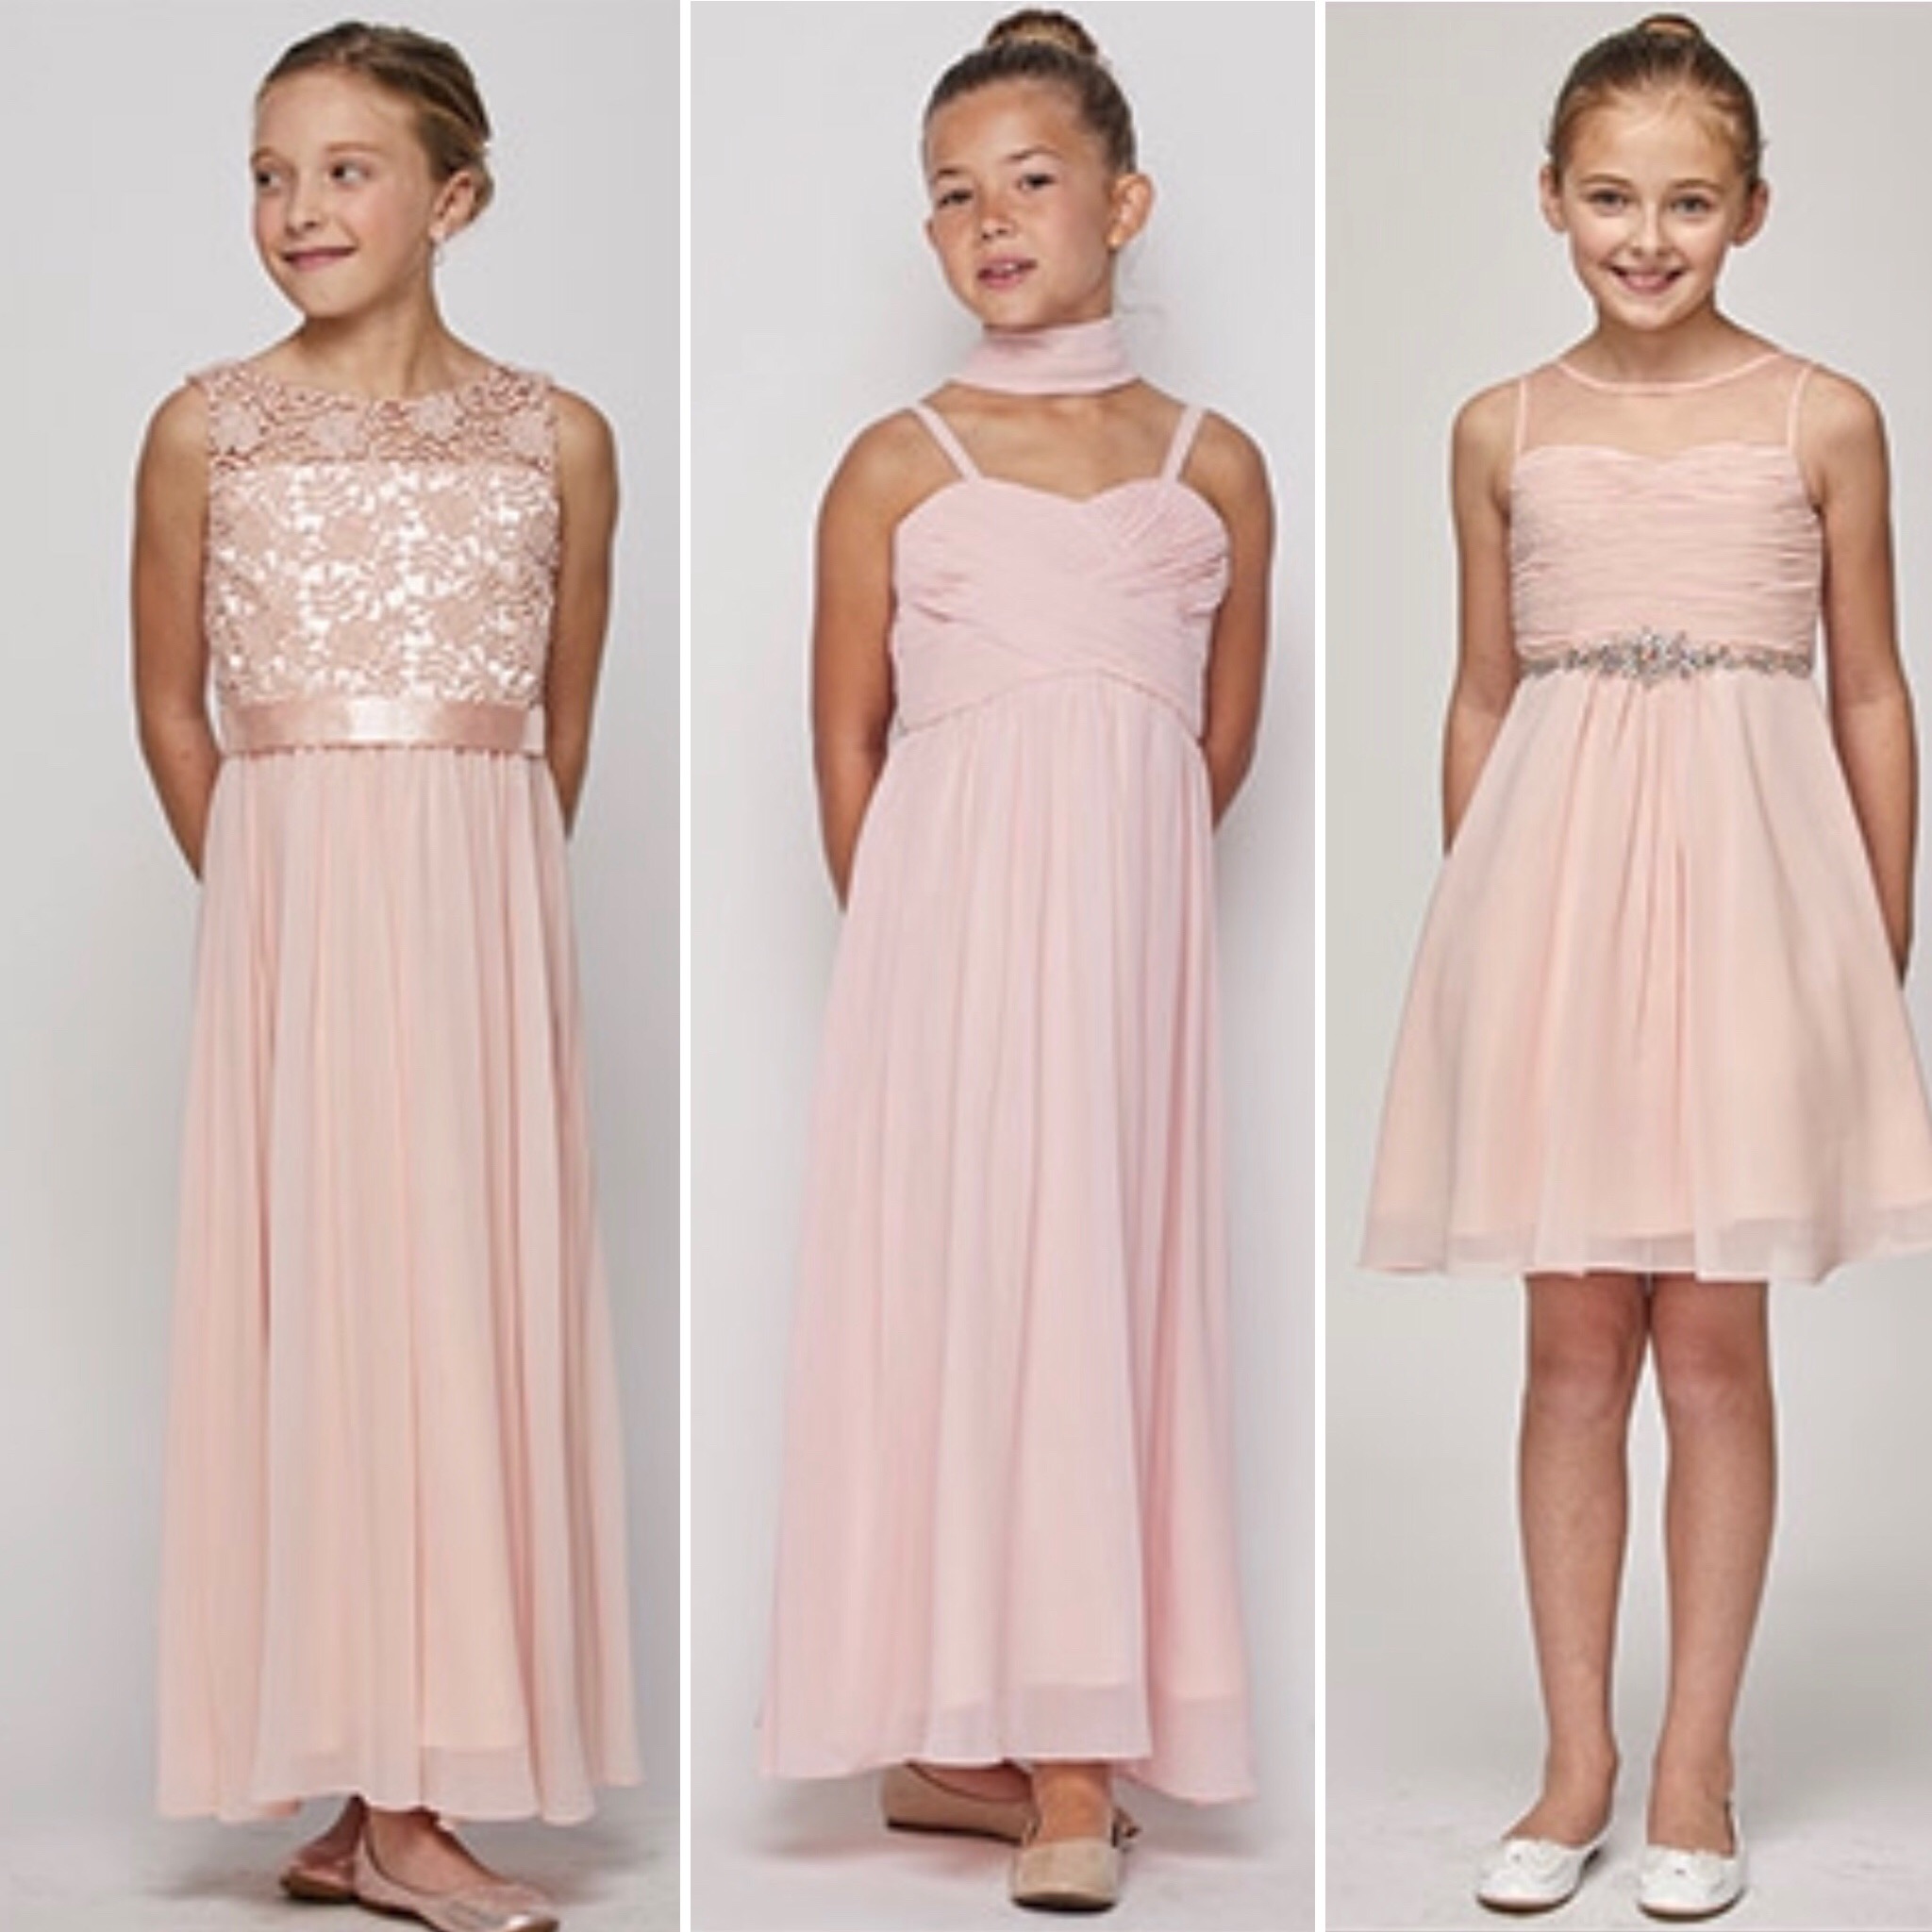 Cichic Girls Party Dress Princess Dress for Girls Formal Dresses Elegant  Baby Girls Dress Age 0-10 Years … (5-6 Years, Pink 02) : Amazon.in:  Clothing & Accessories